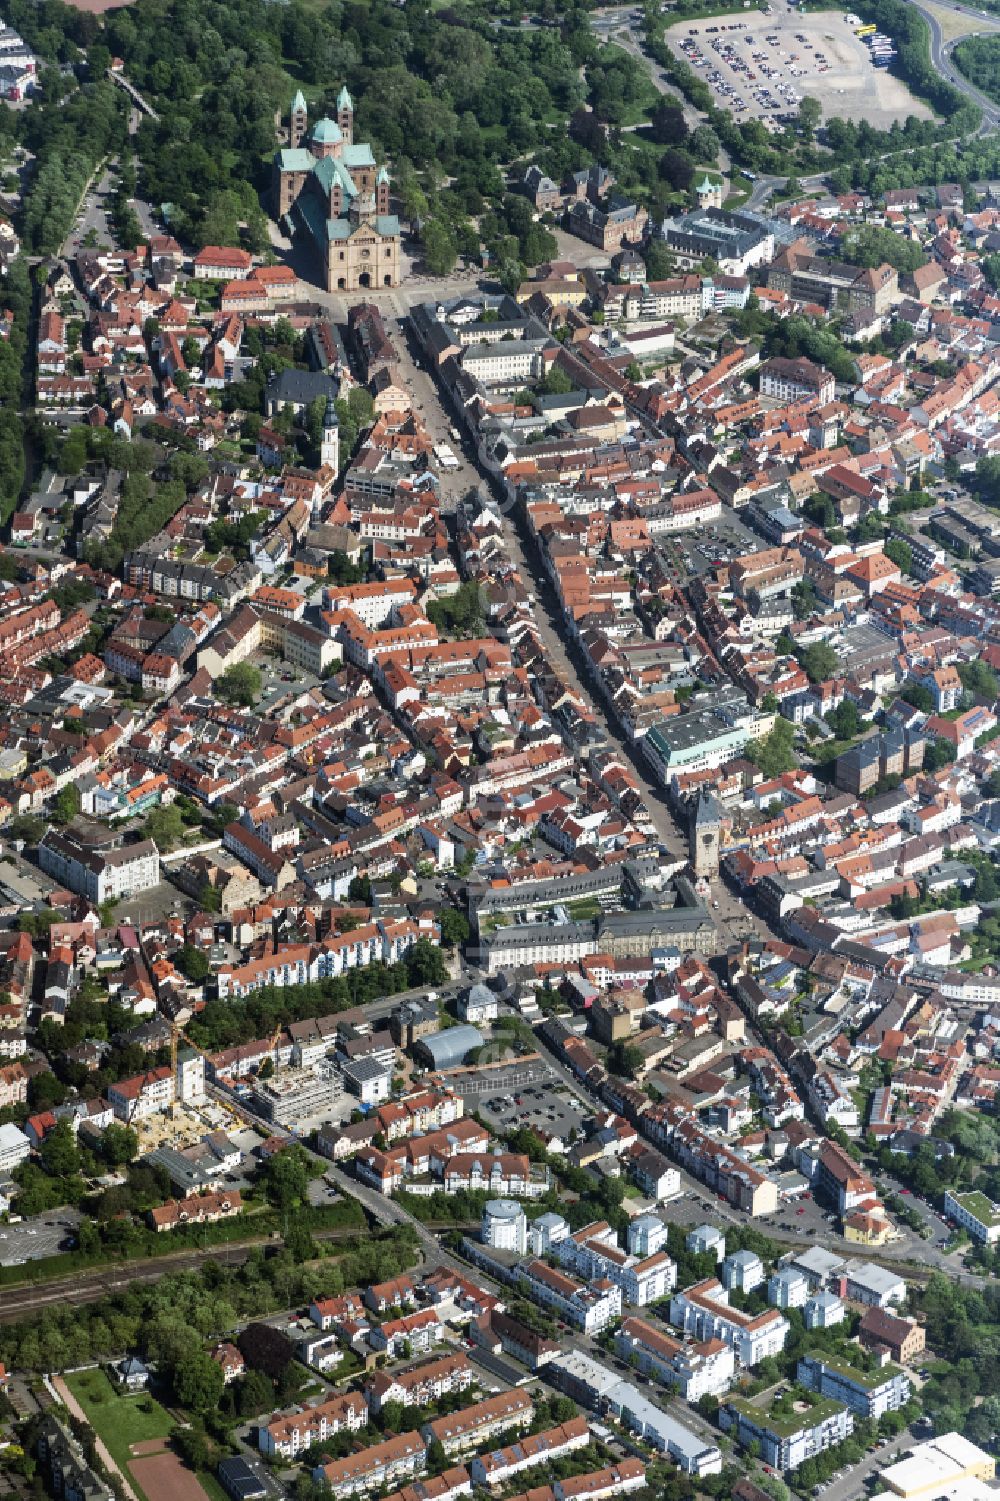 Dudenhofen from above - The city center in the downtown area in Dudenhofen in the state Rhineland-Palatinate, Germany